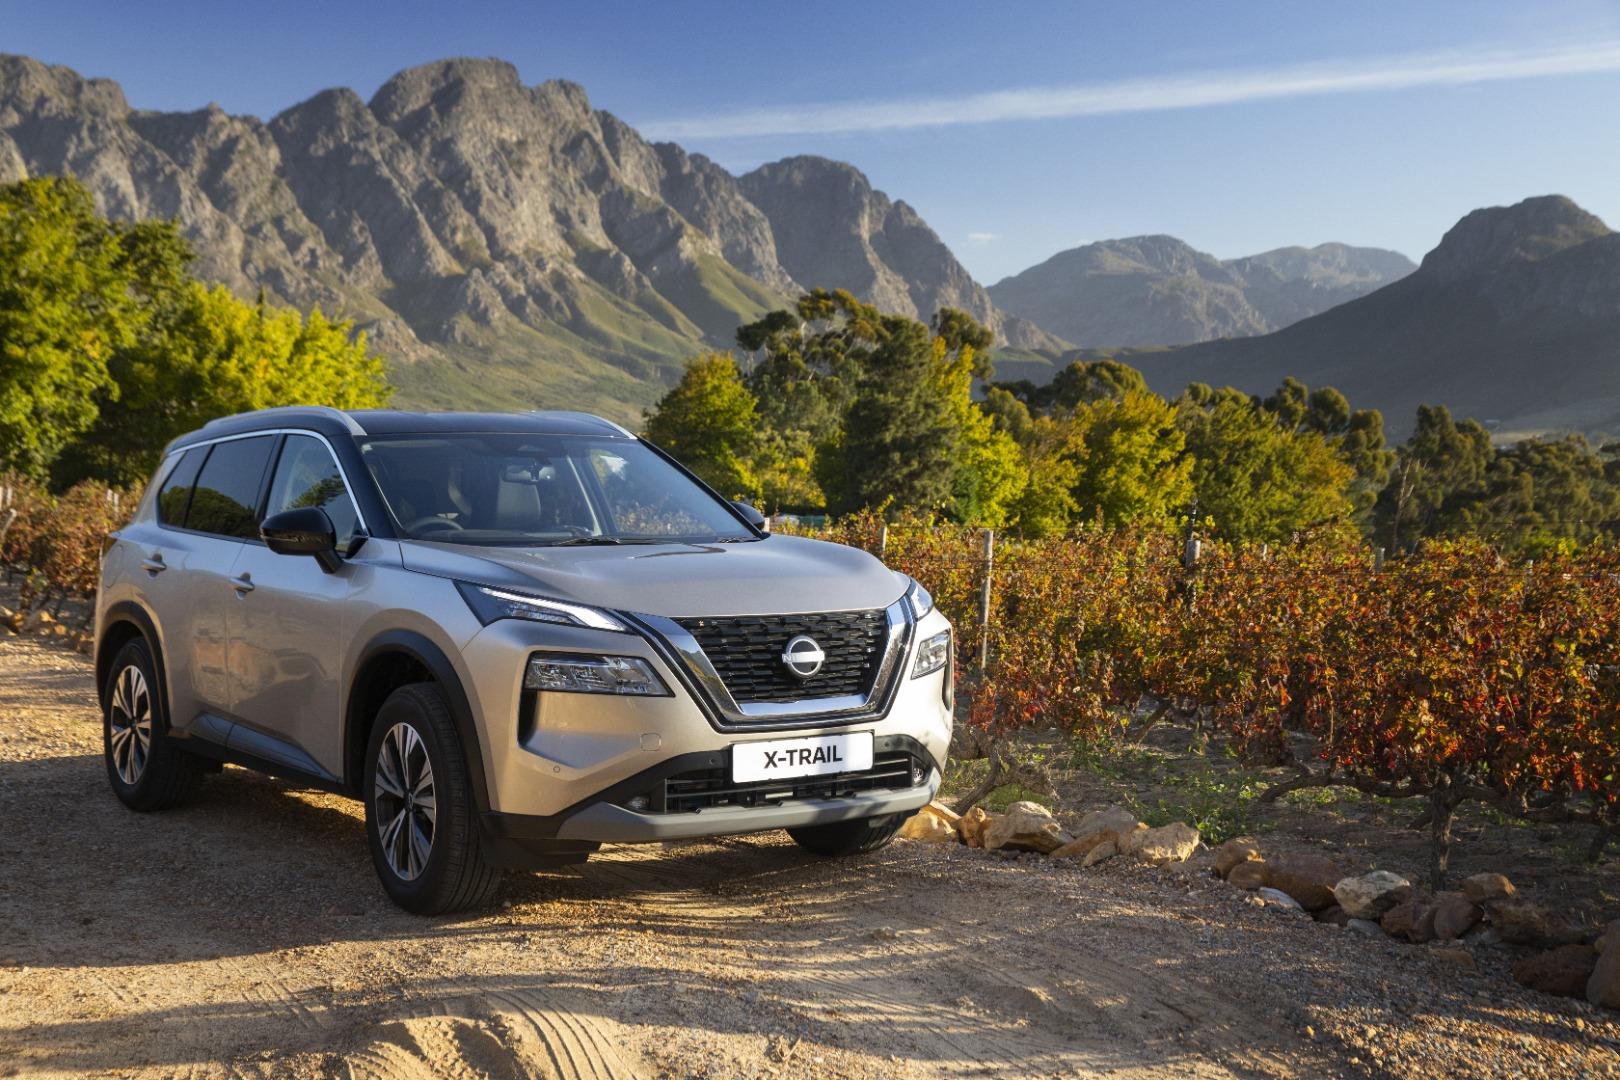 nissan x-trail trims head to head: here's our winner